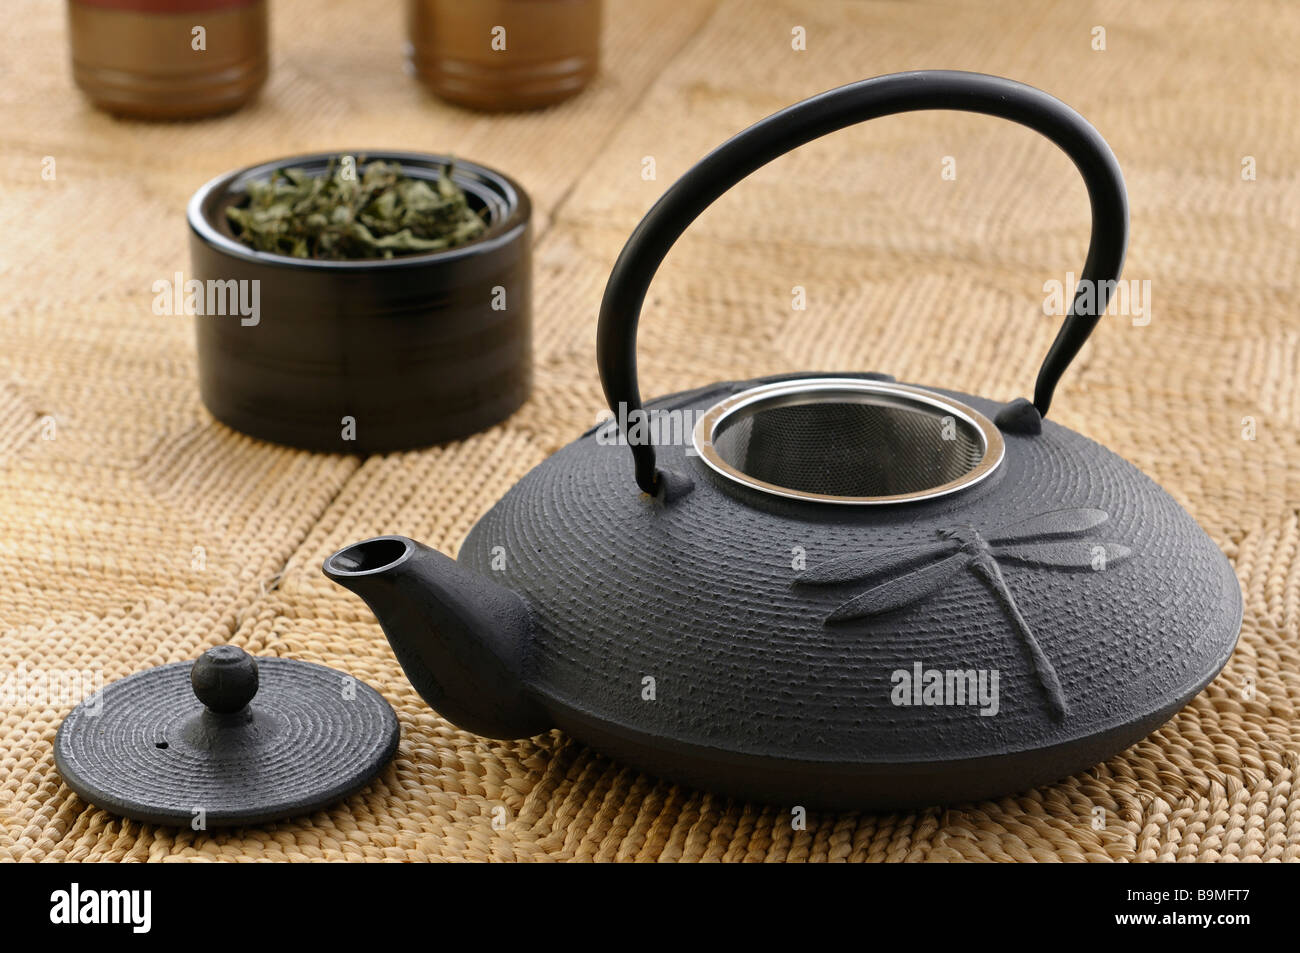 Japanese cast iron teapot with tea leaves and cups on a handmade maize mat Stock Photo